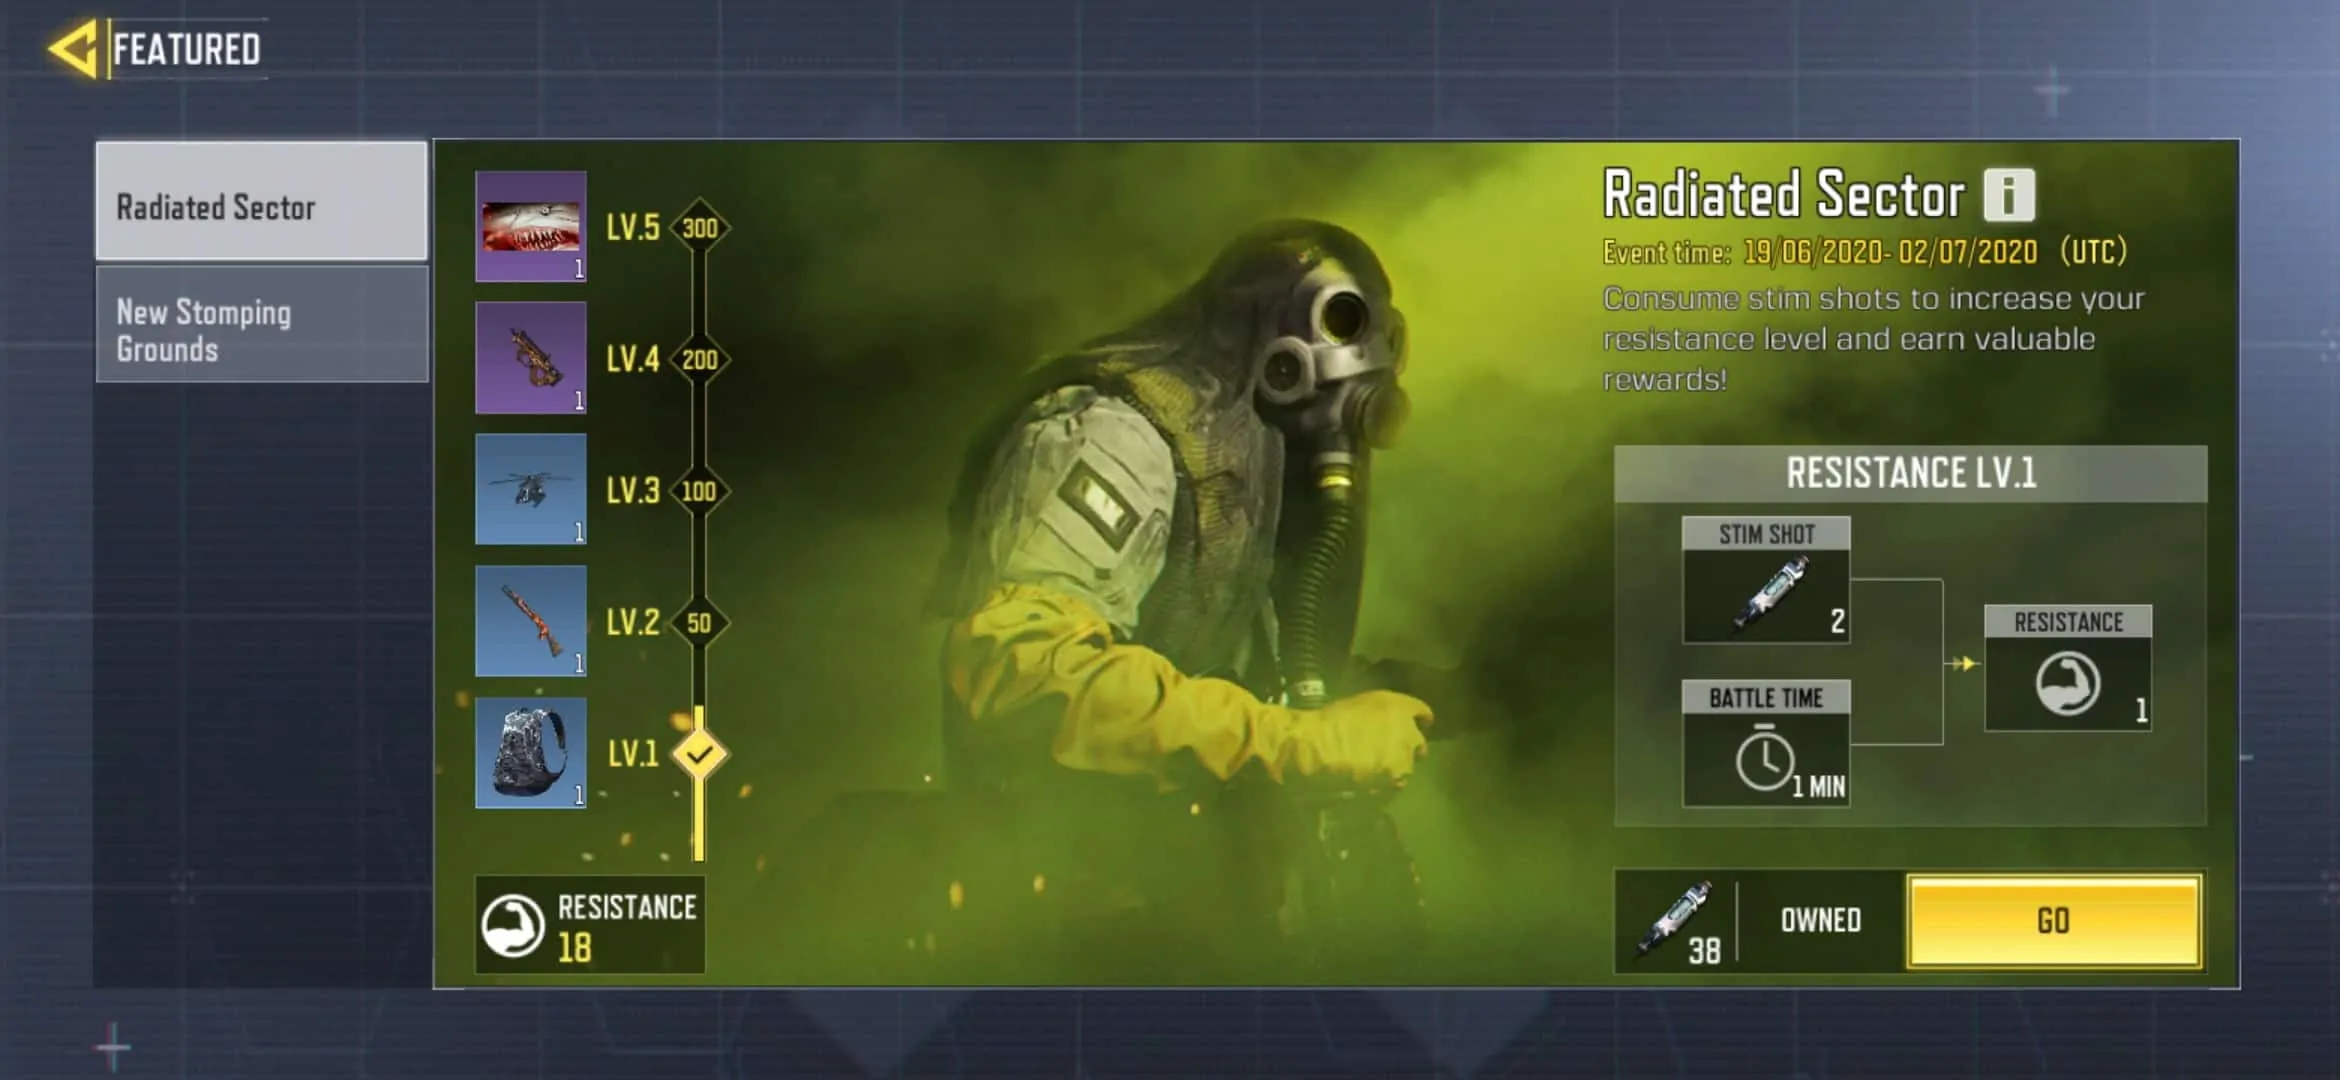 CoD Mobile Free Loot Irradiated Sector Event